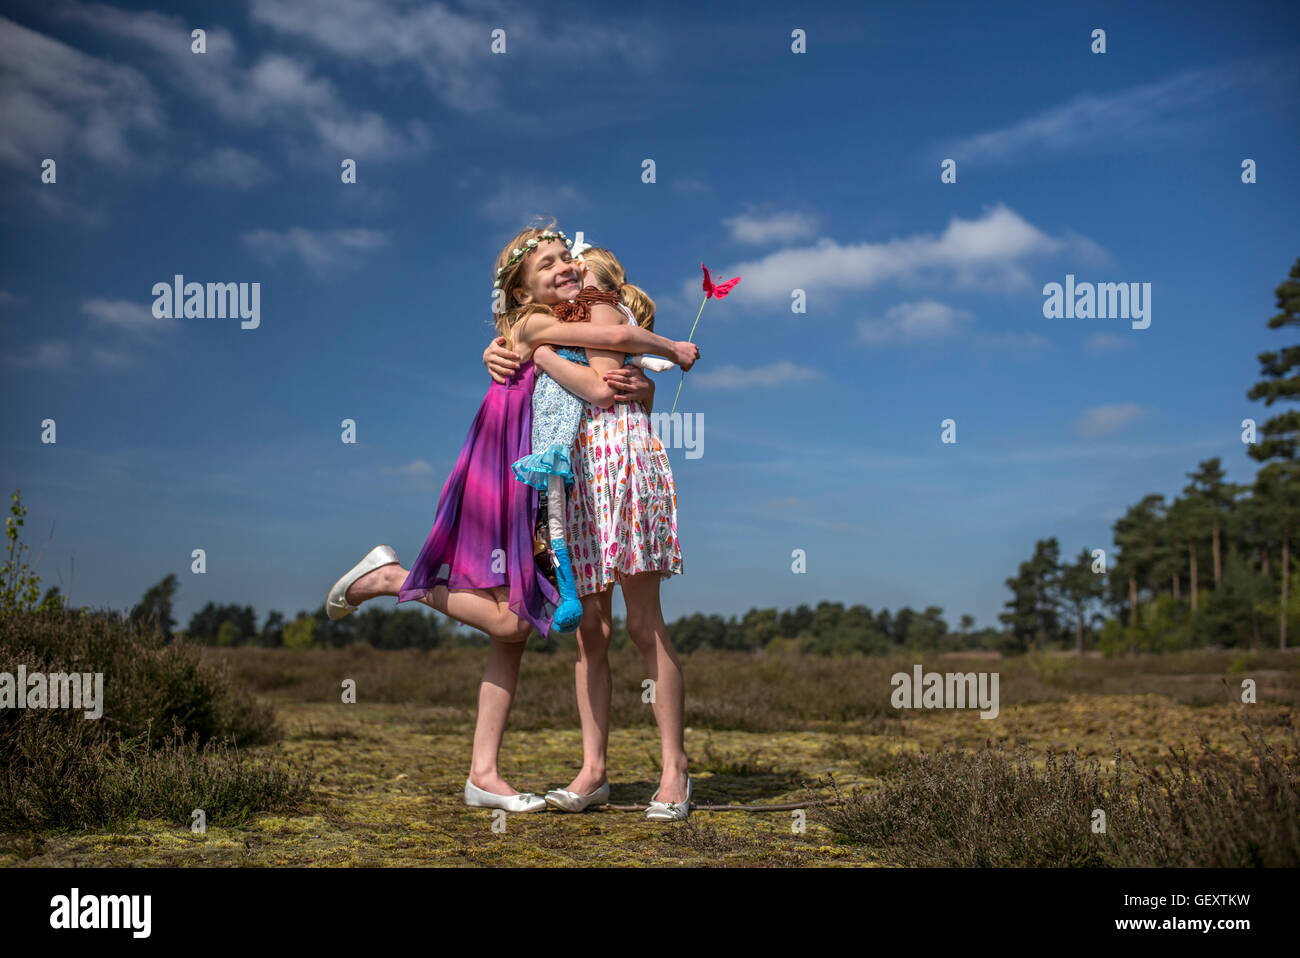 Identical twin sisters play together in the open air. Stock Photo